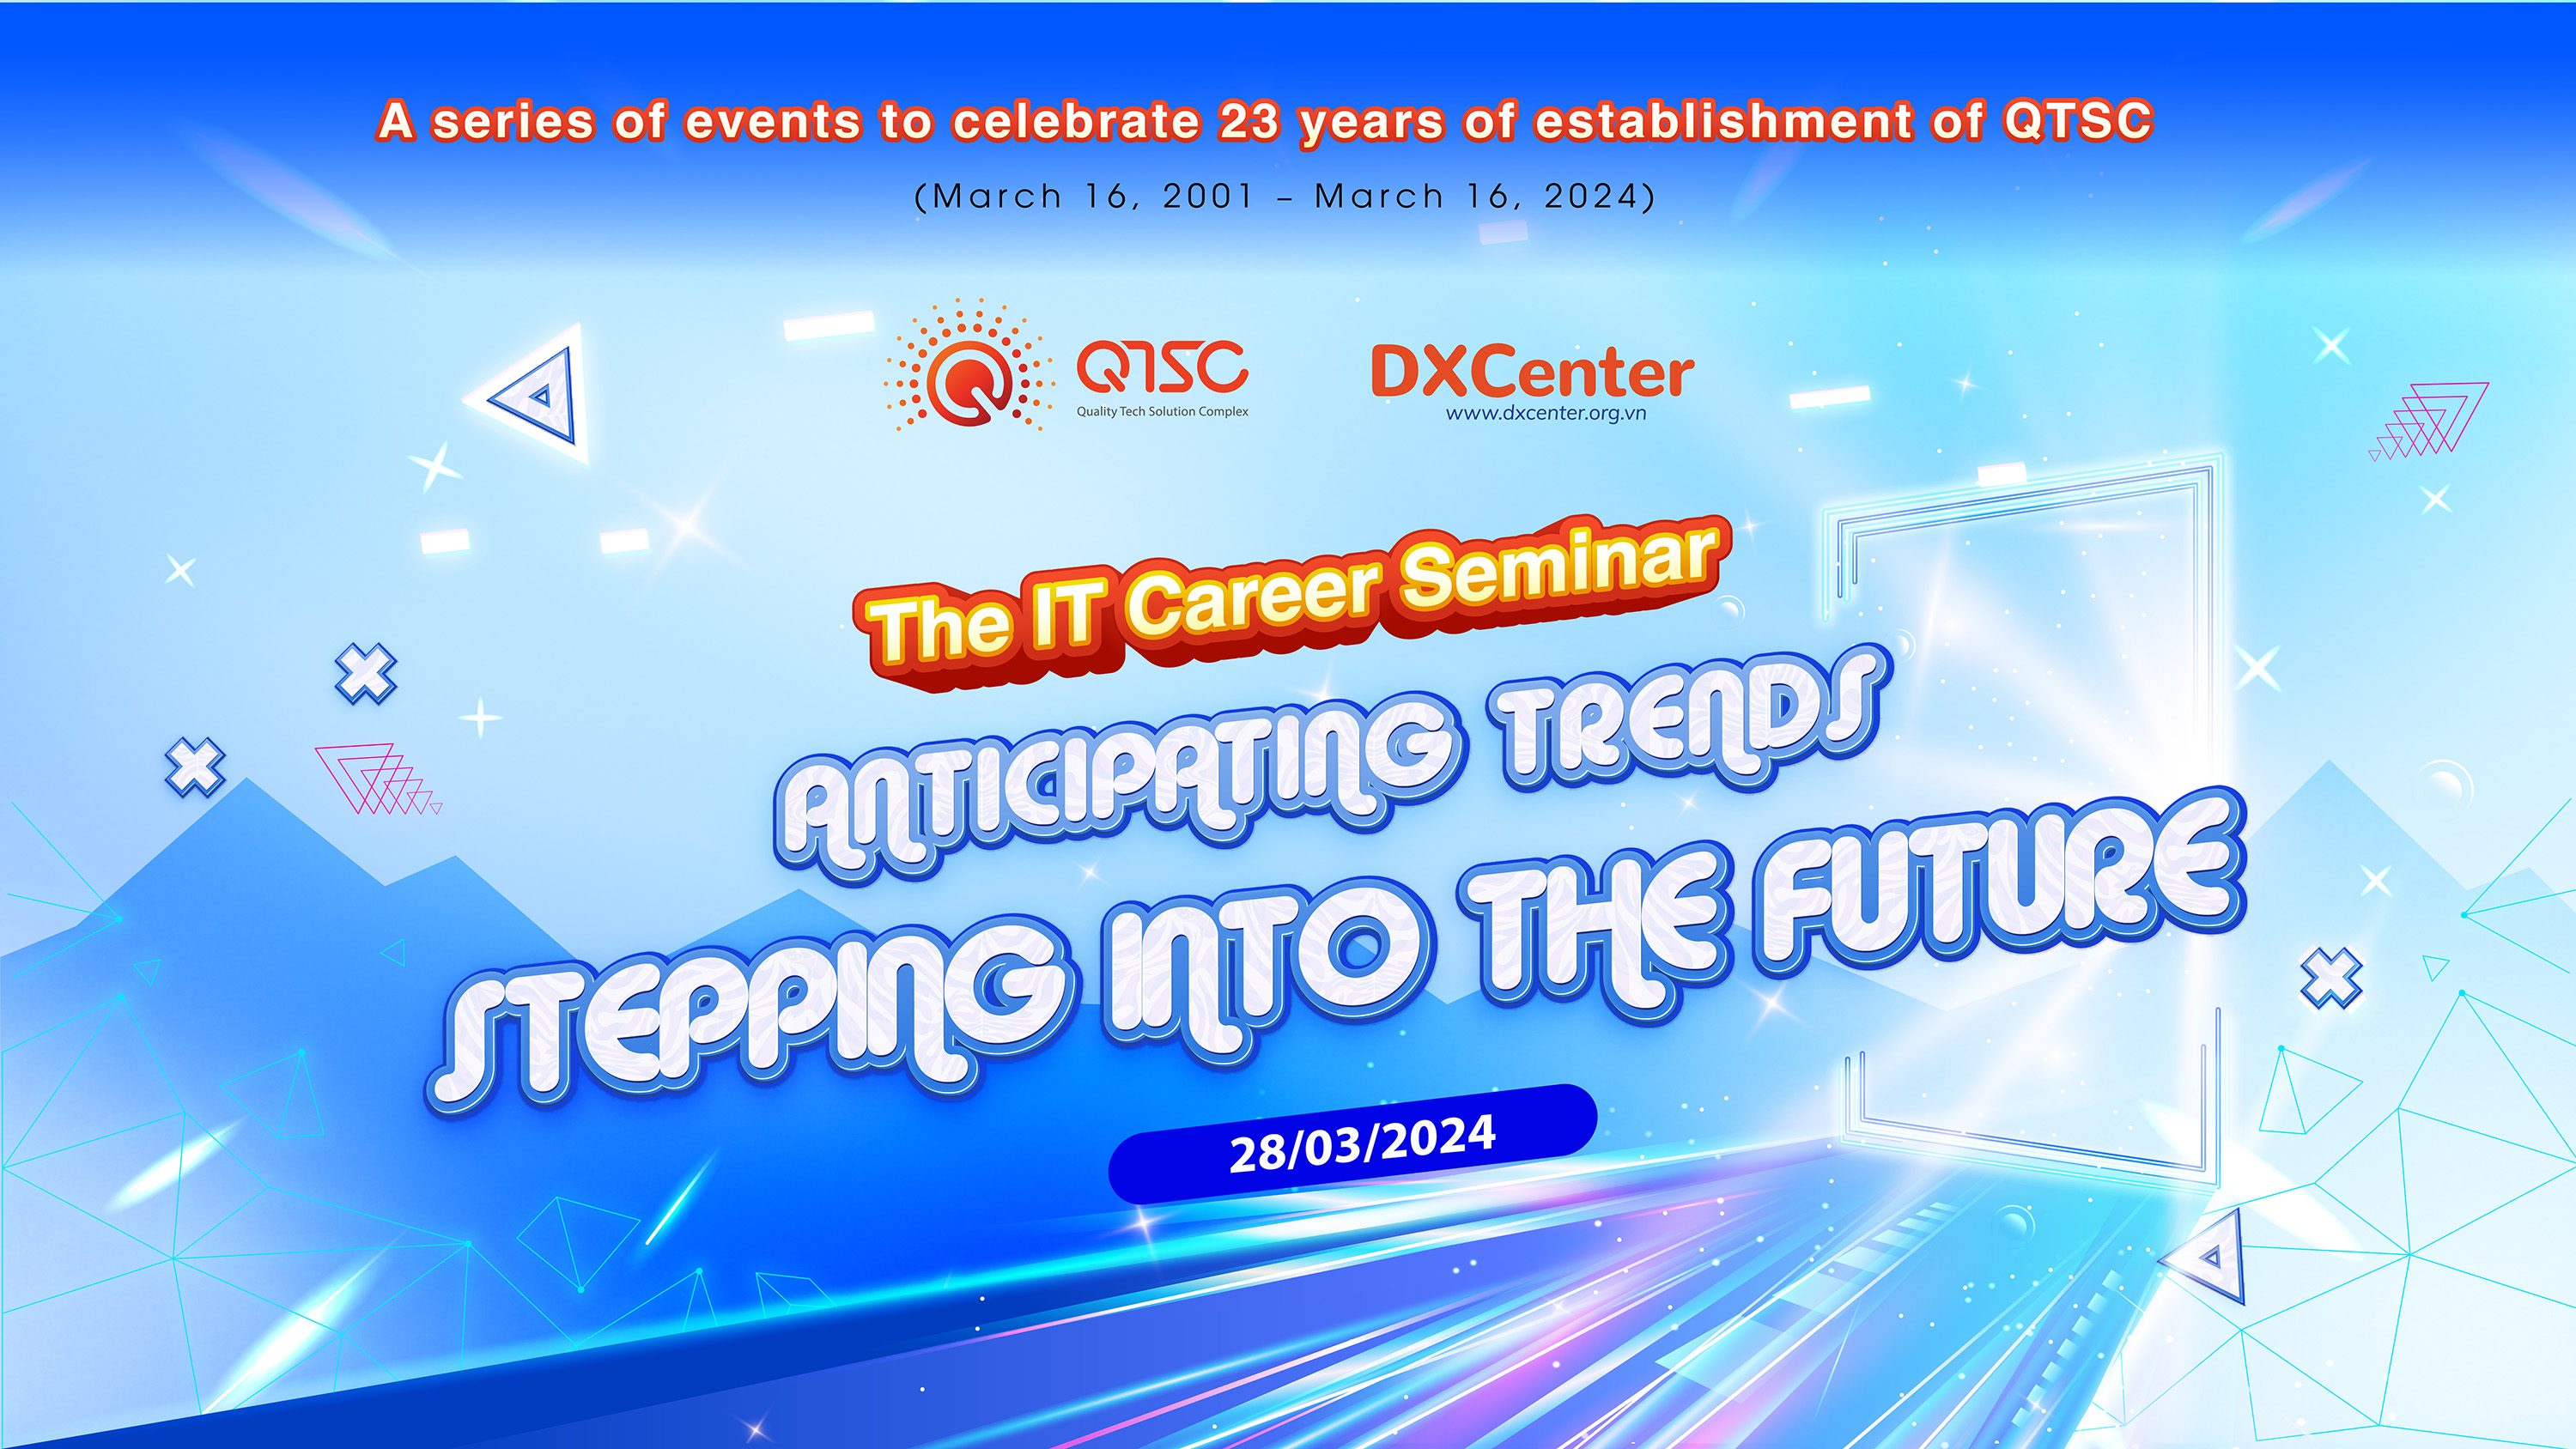 Inviting to attend to the IT career seminar “Anticipating trends – Stepping into the future”